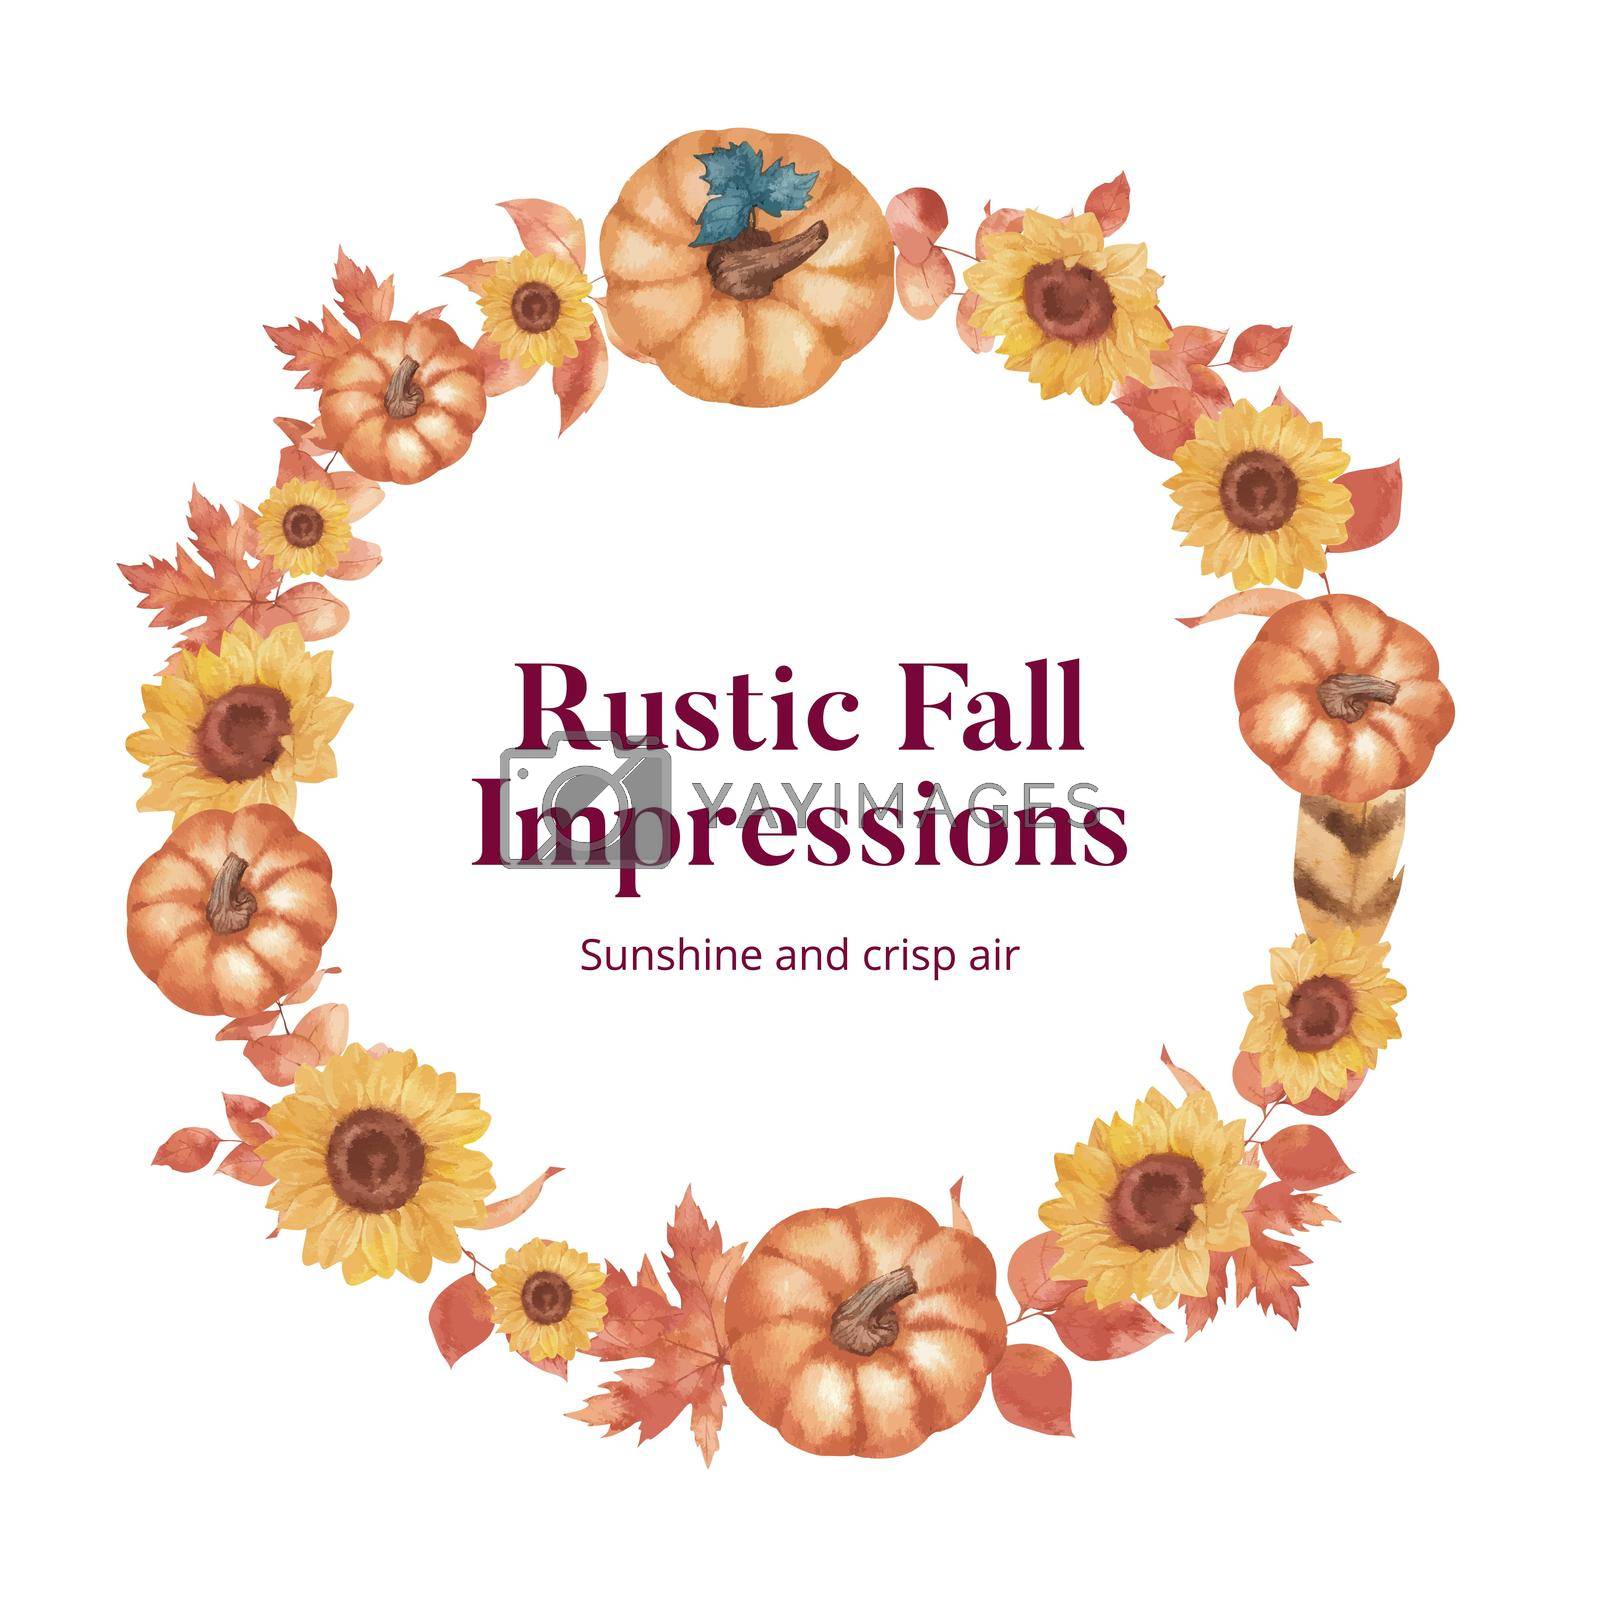 Royalty free image of Wreath template with rustic fall foliage concept,watercolor style by Photographeeasia